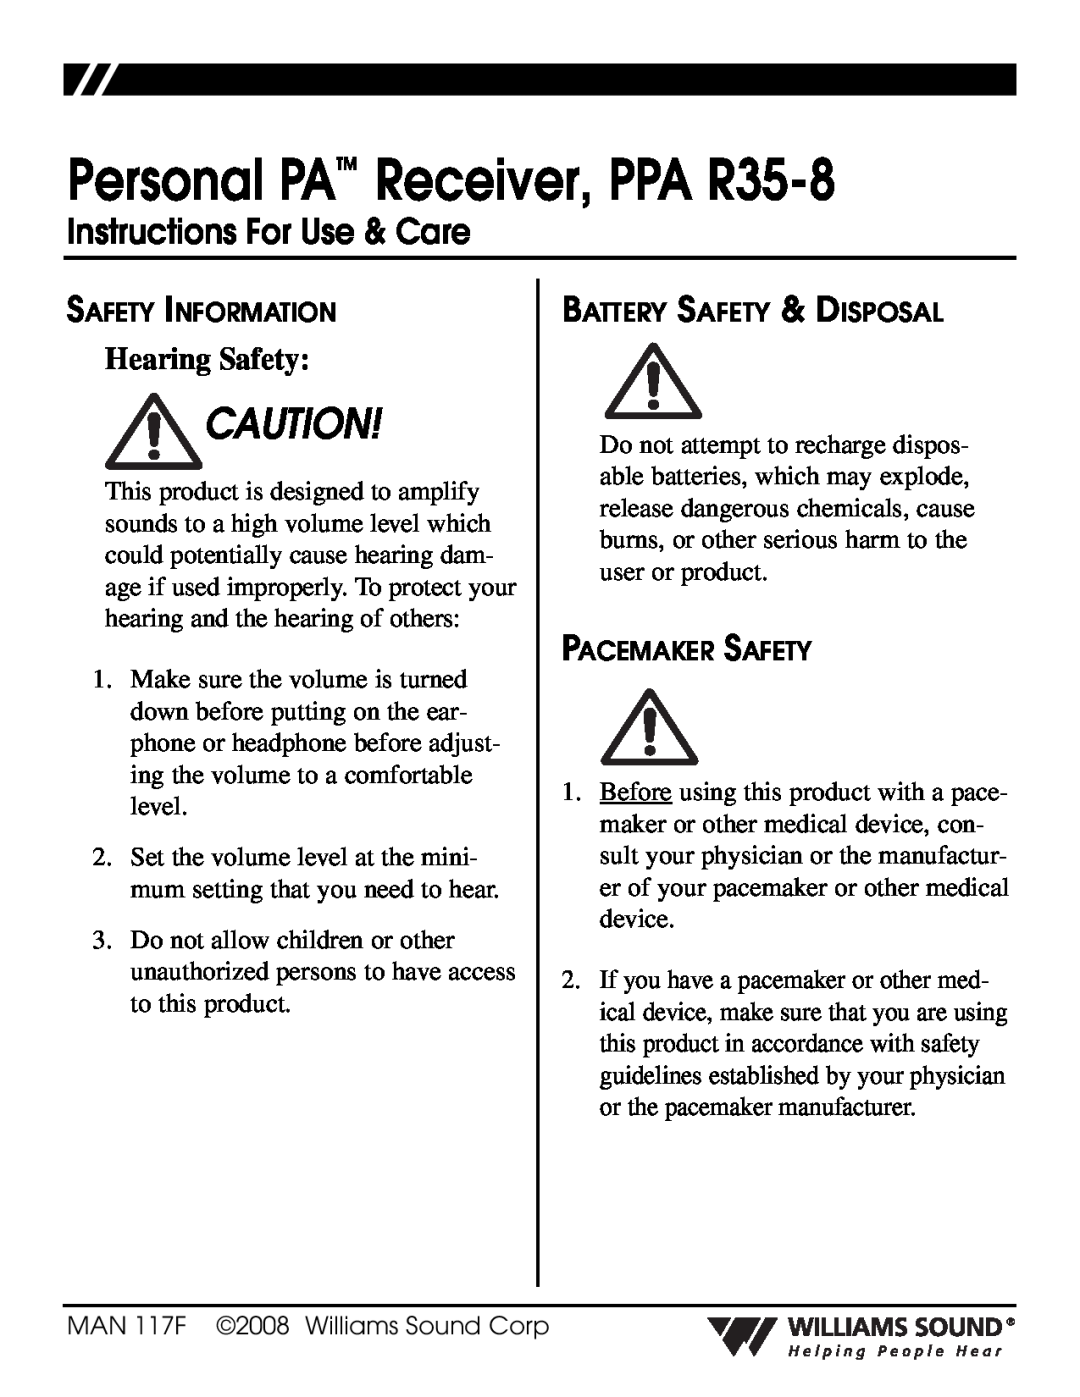 Williams Sound manual Hearing Safety, Personal PA Receiver, PPA R35-8, Instructions For Use & Care 